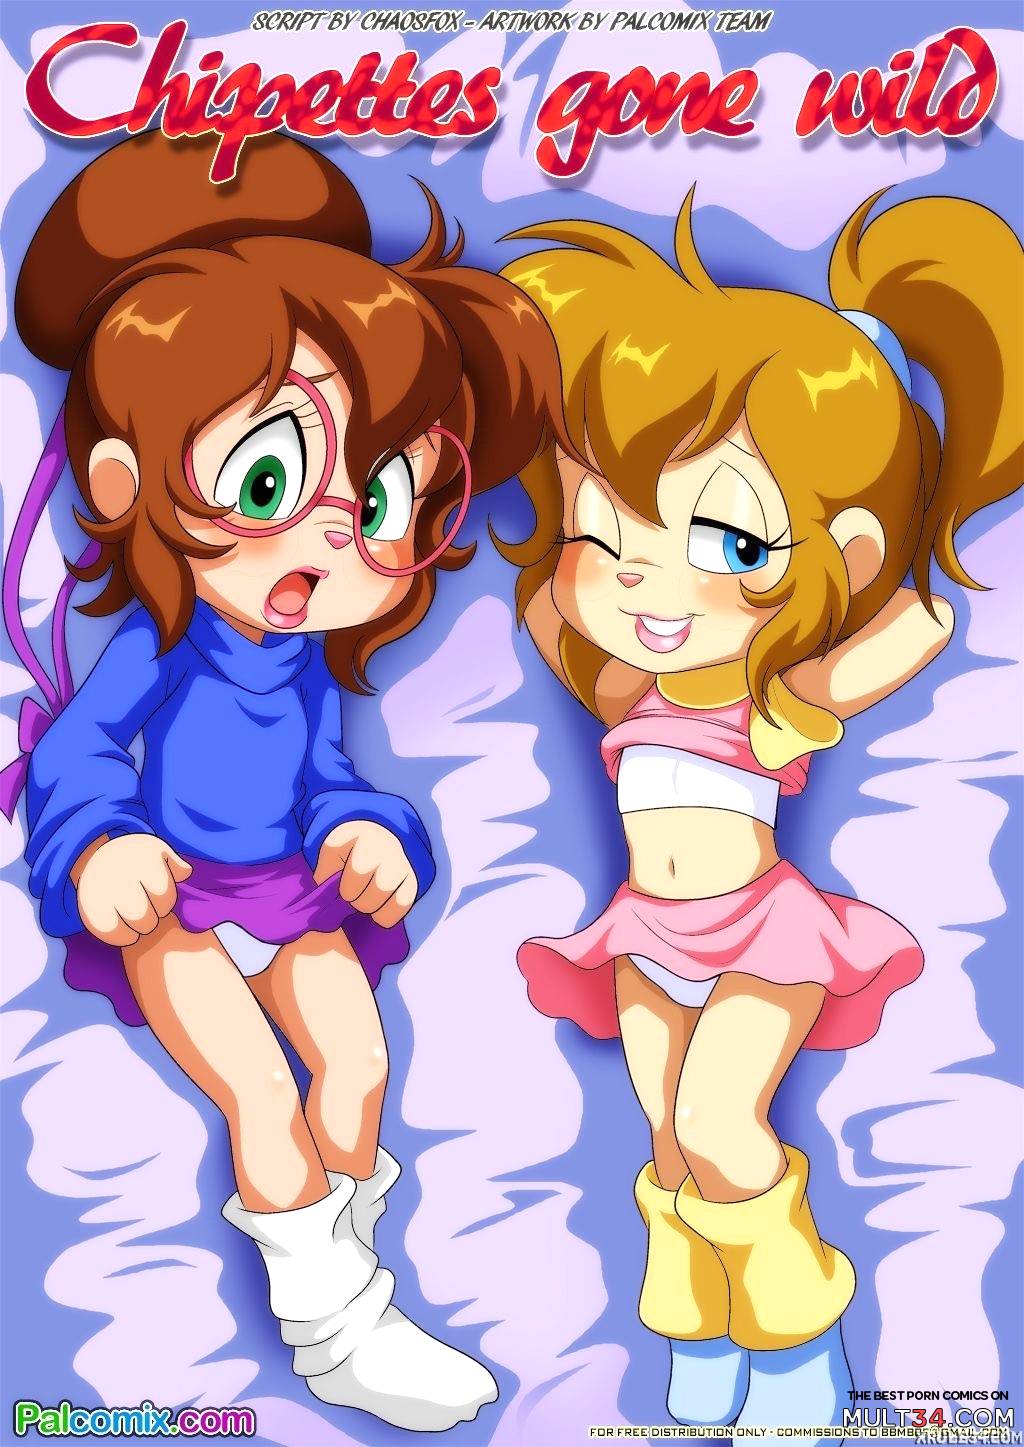 Chipettes gone wild page 1